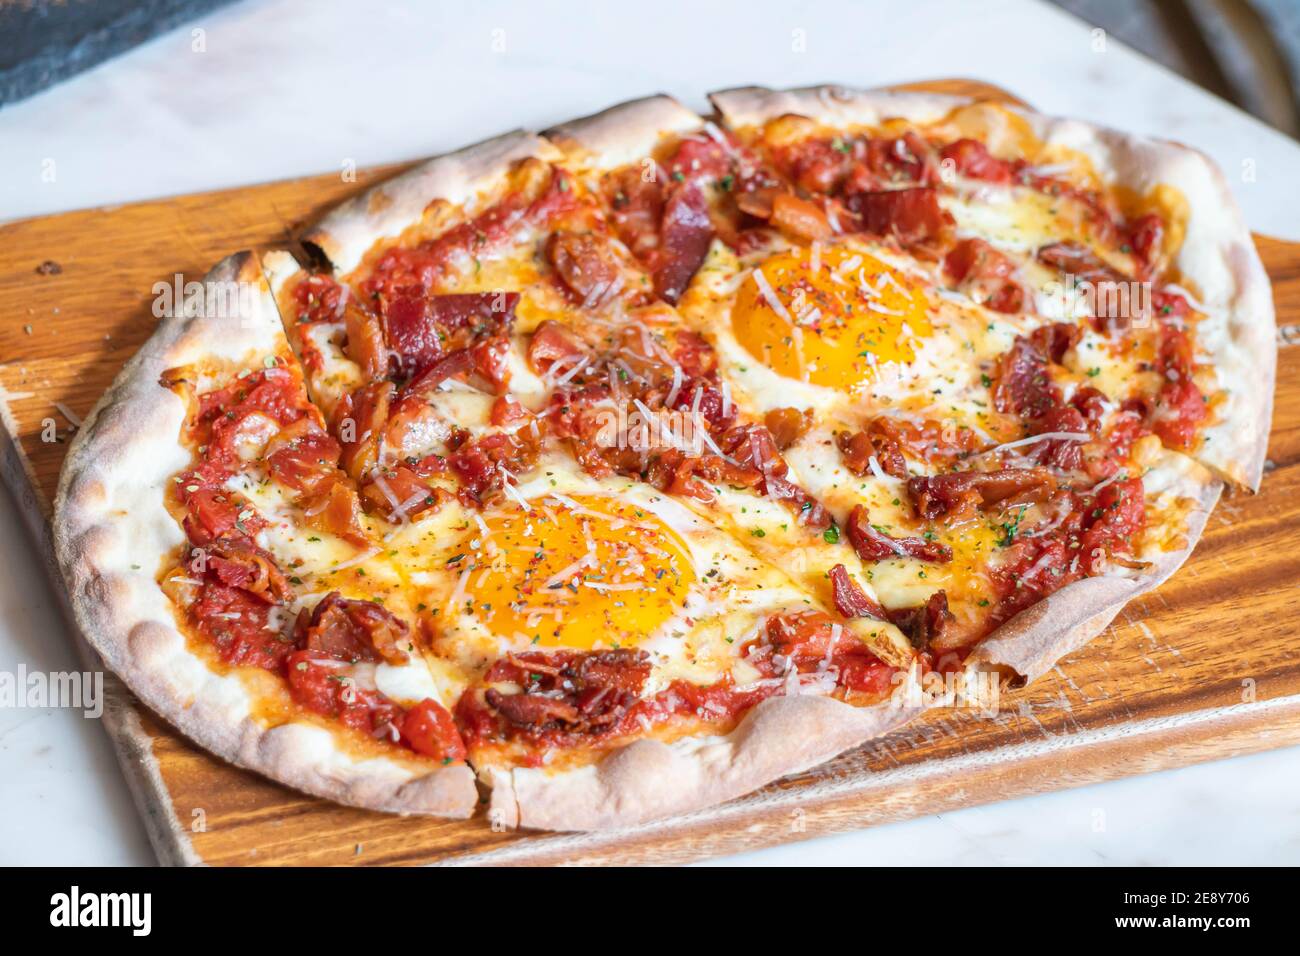 Ham and Eggs Breakfast style pizza on wooden platter Stock Photo